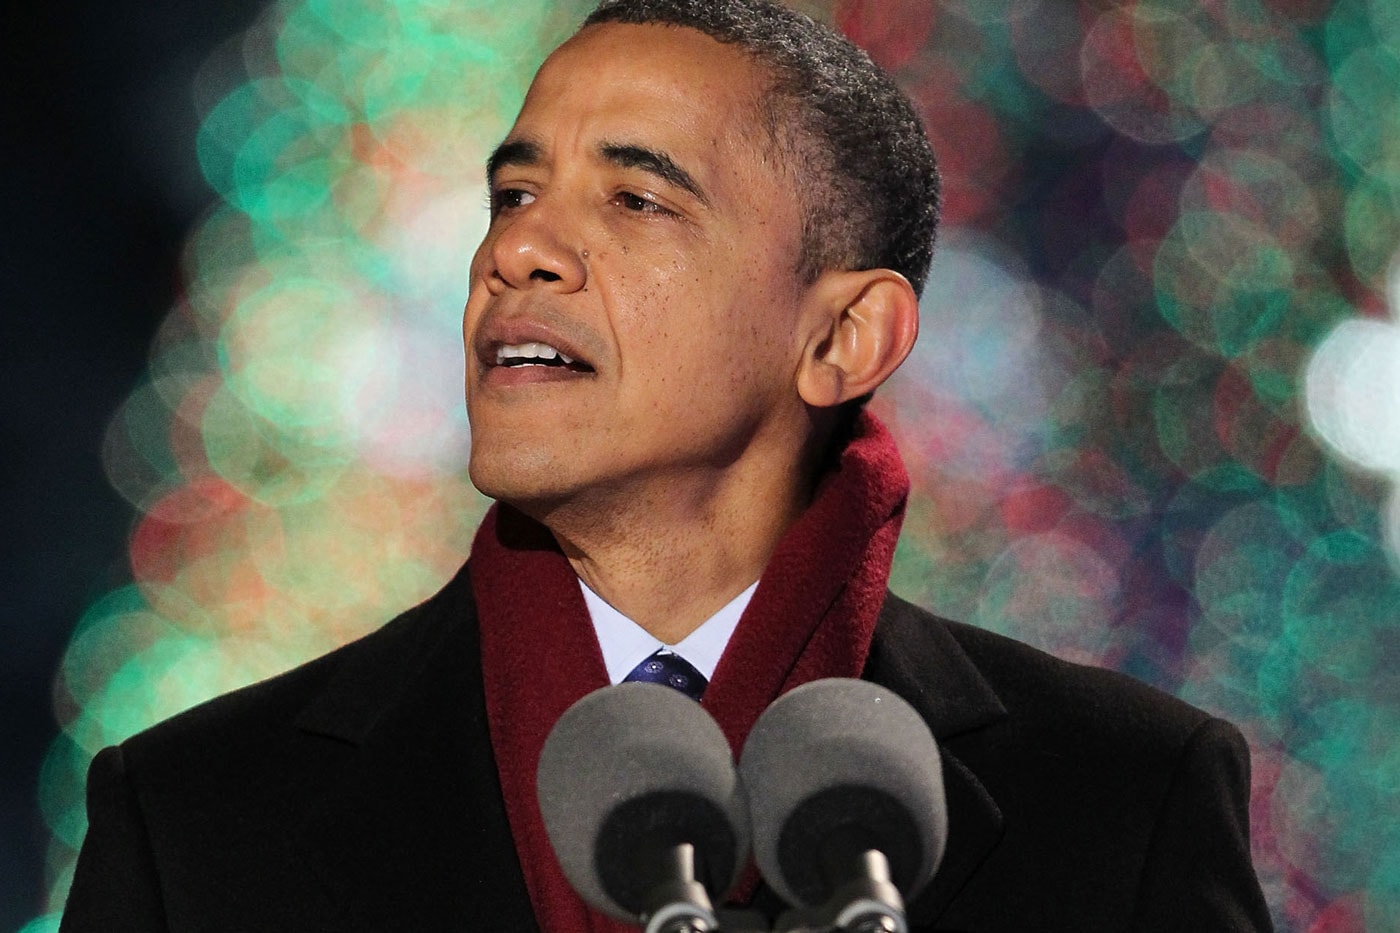 Obama Sings "Jingle Bells" With Chance The Rapper